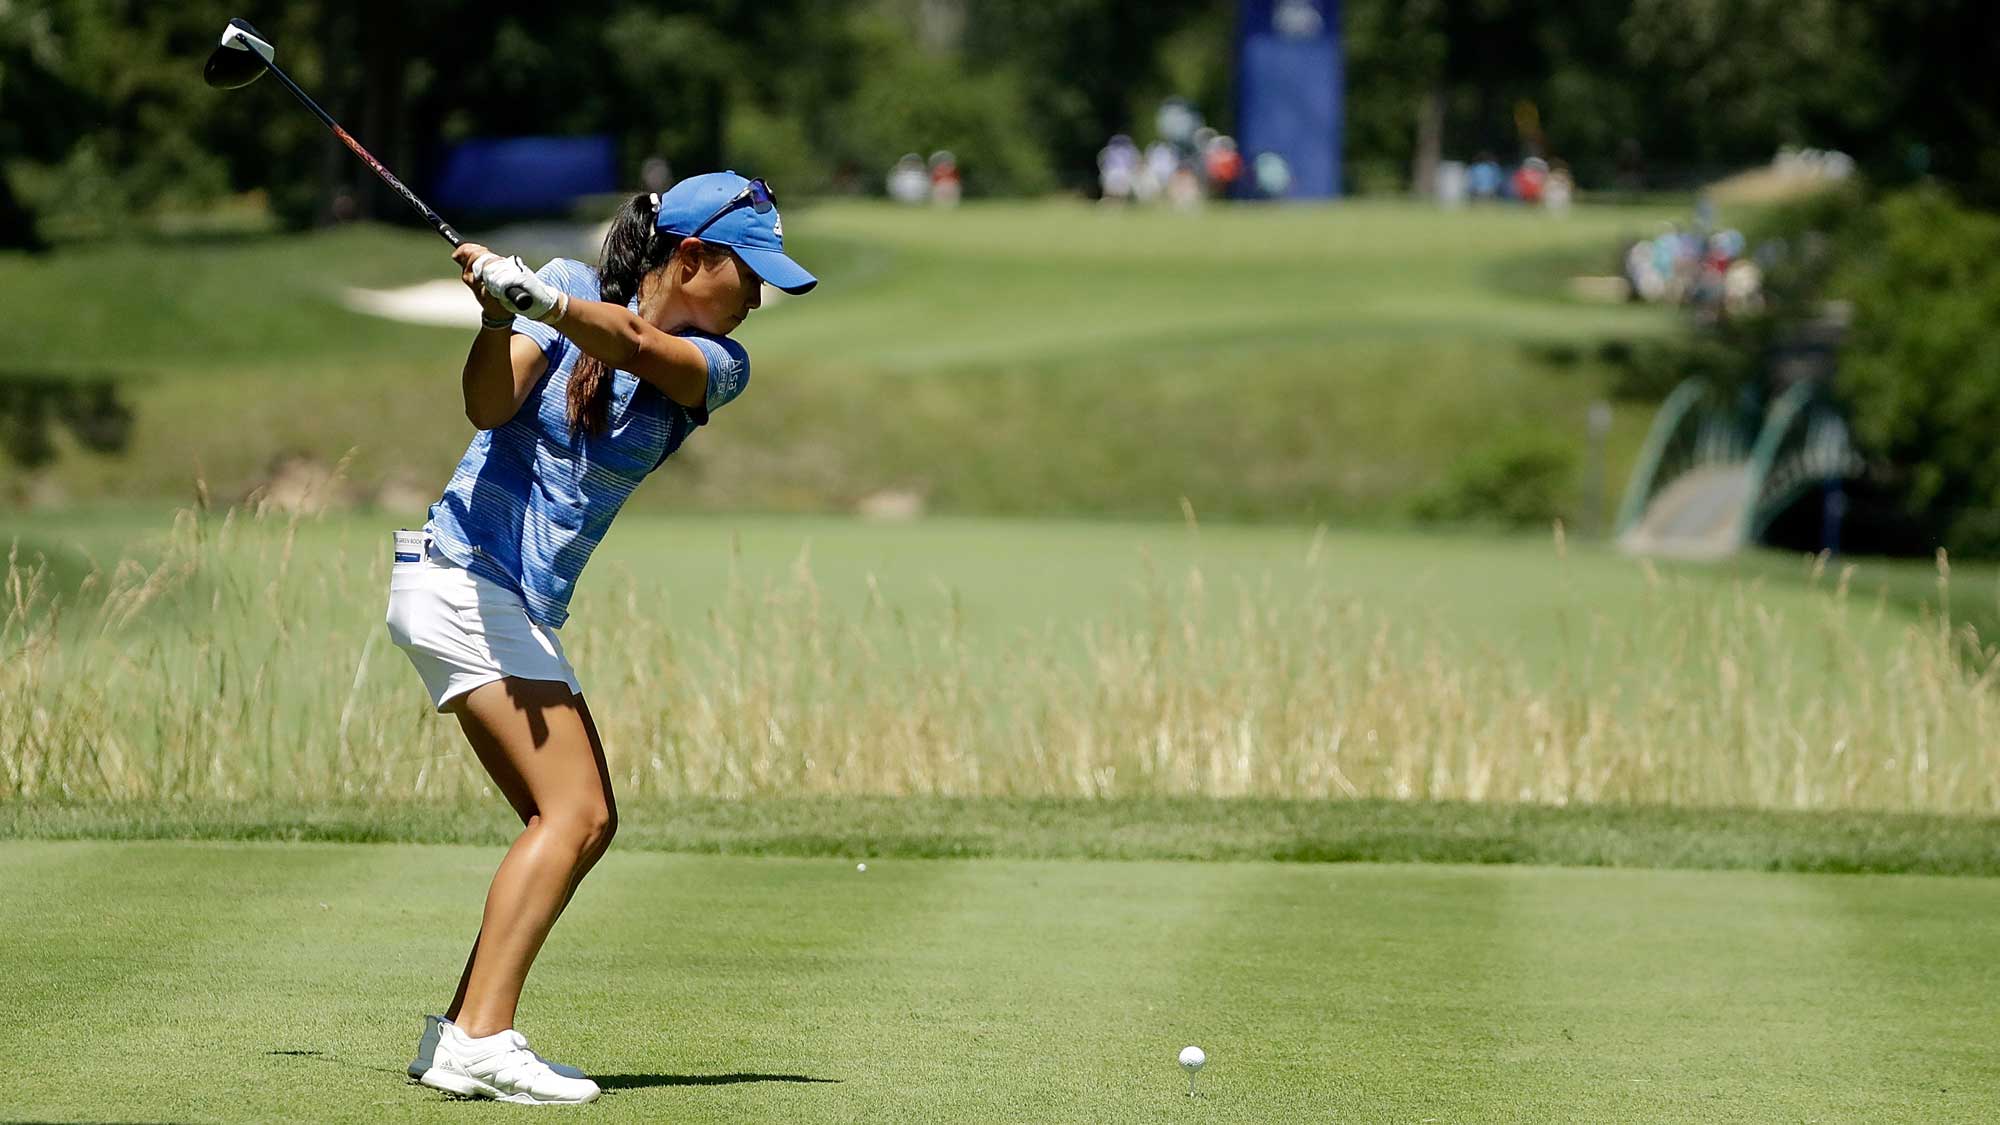 Danielle Kang hits her tee shot on the fifth hole during the final round of the 2017 KPMG PGA Championship